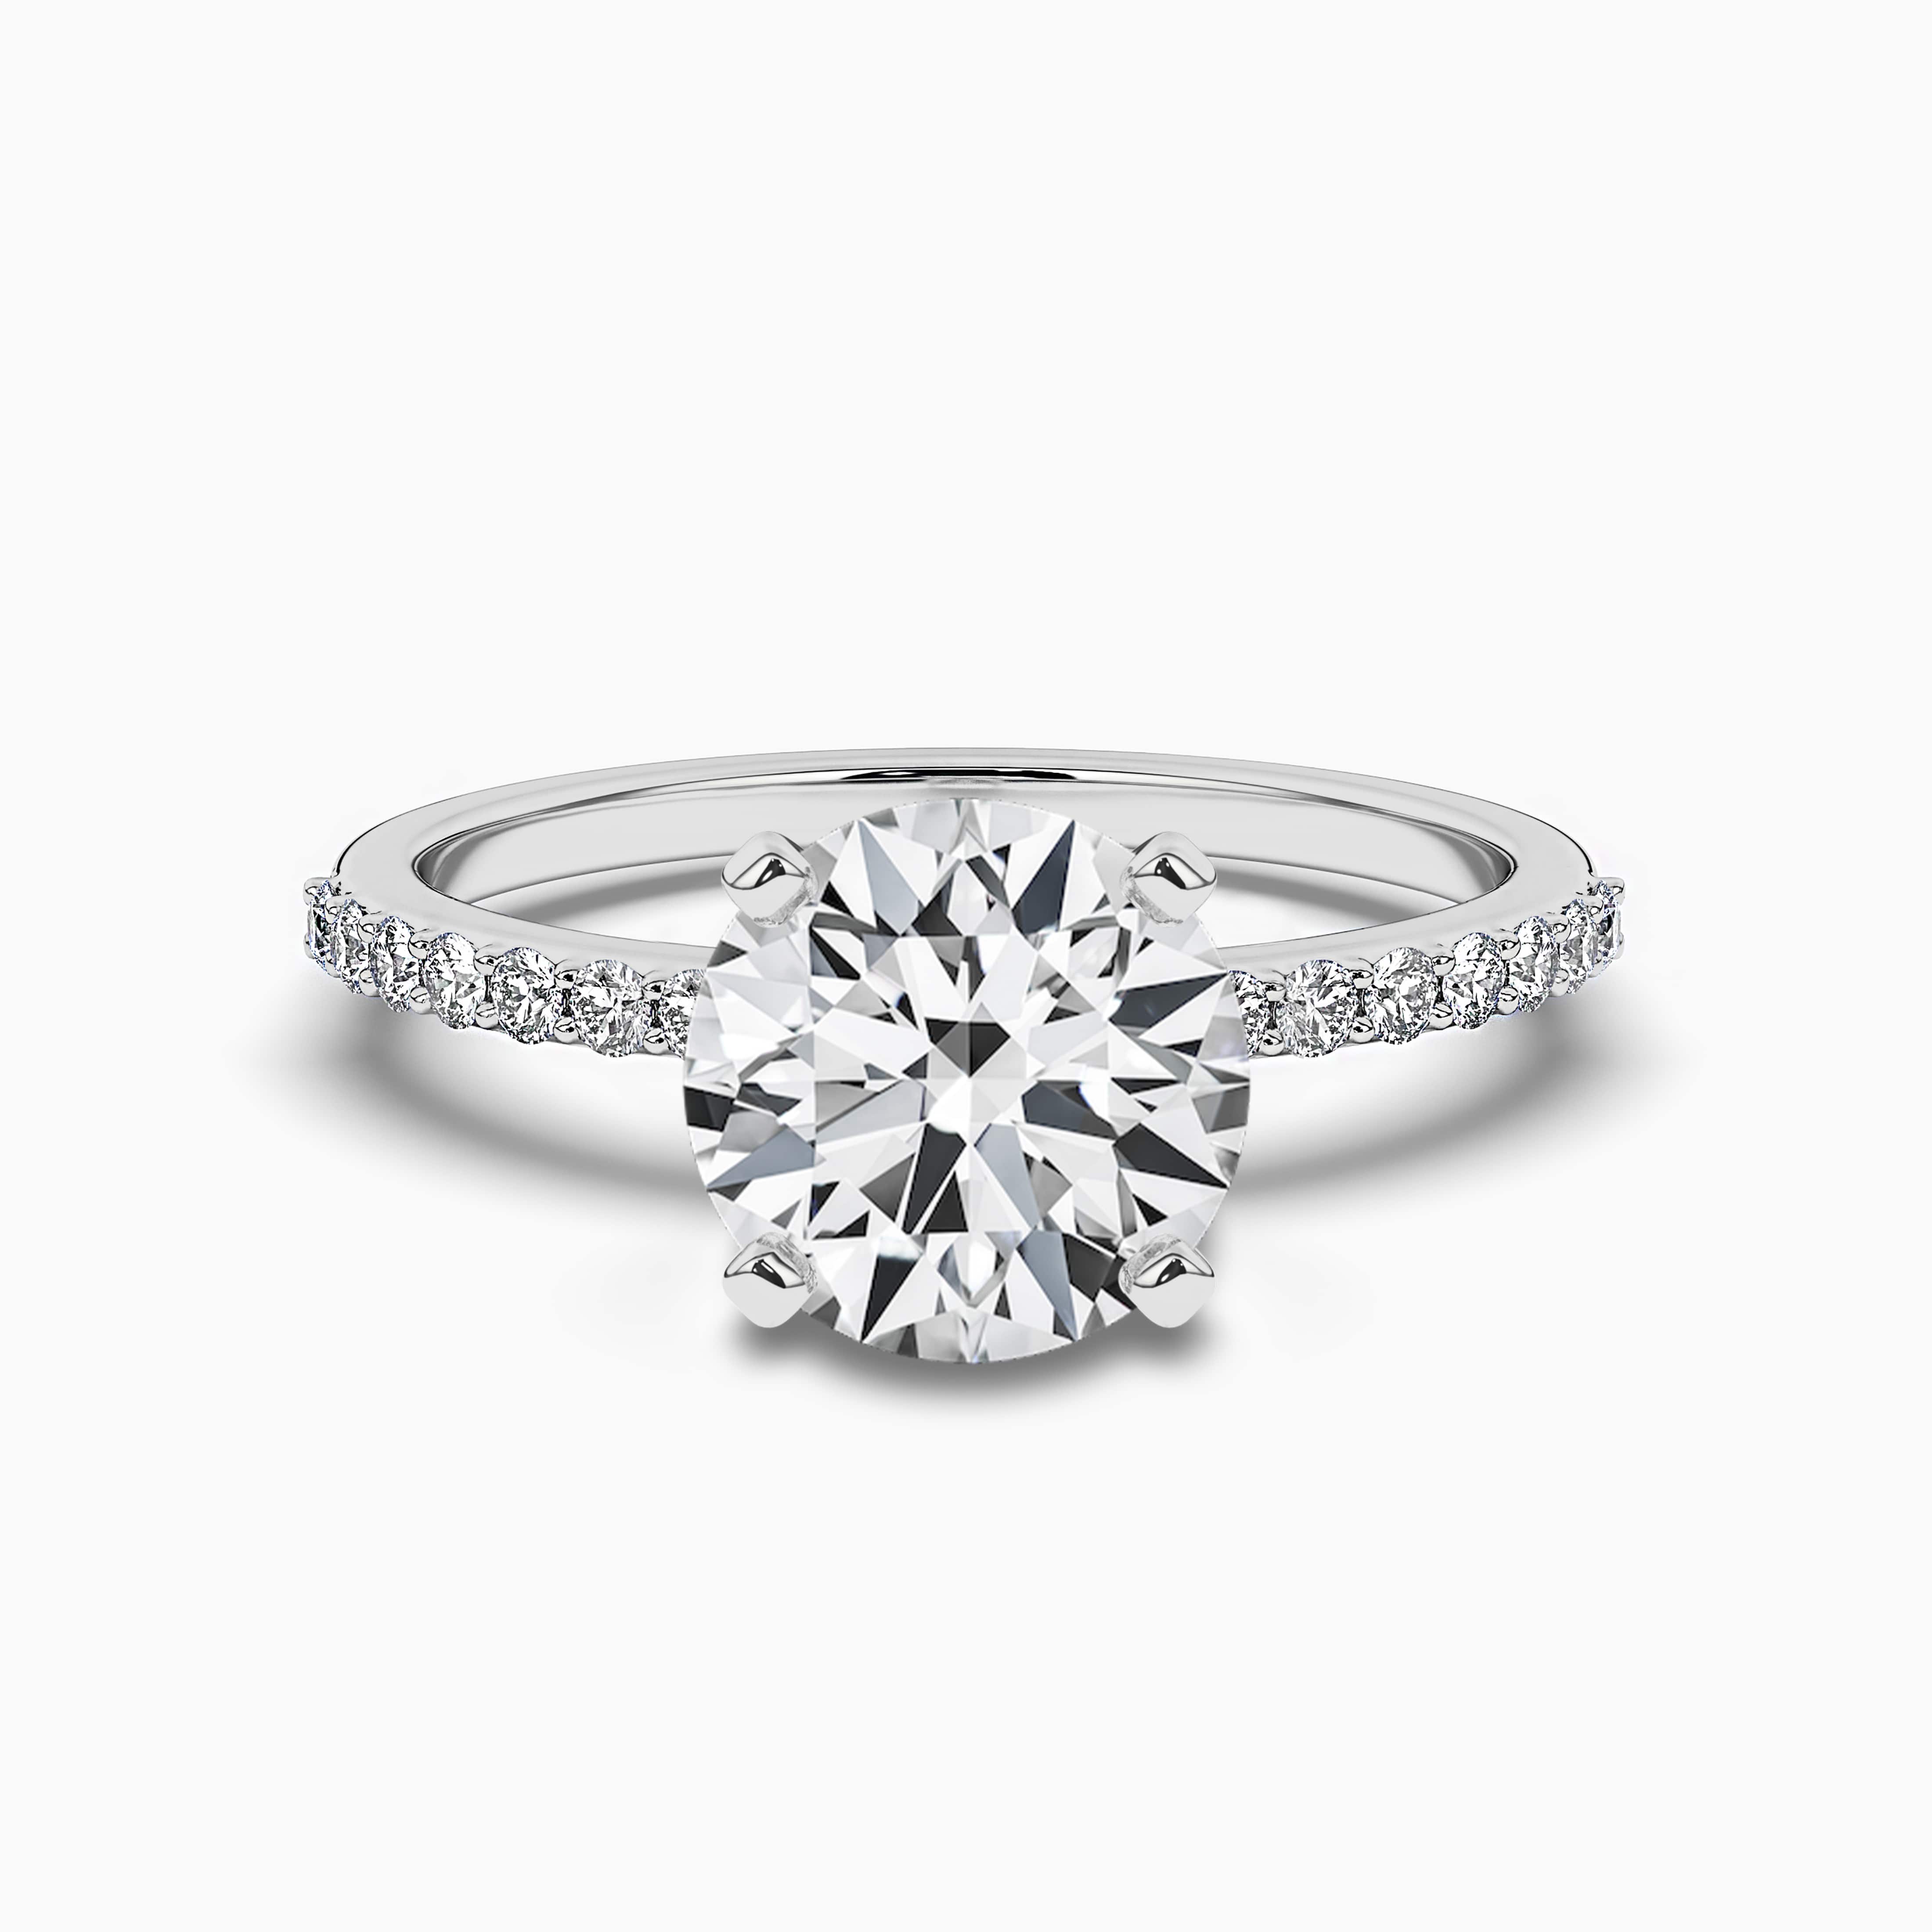 ROUND CENTER SIDE STONE DIAMOND ENGAGEMENT RING SETTING IN WHITE GOLD